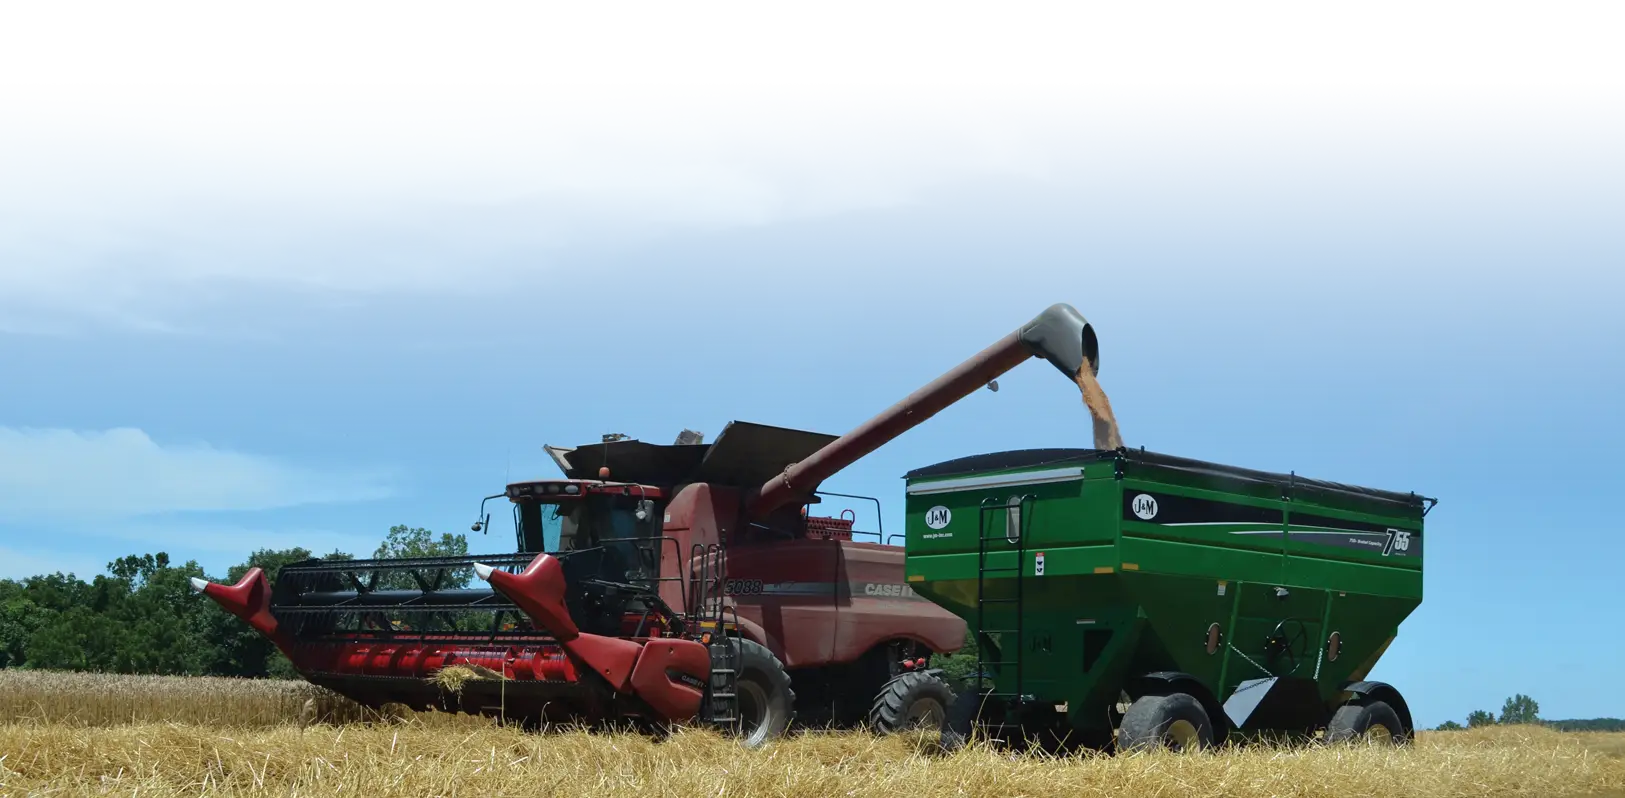 gravity wagon being filled by combine